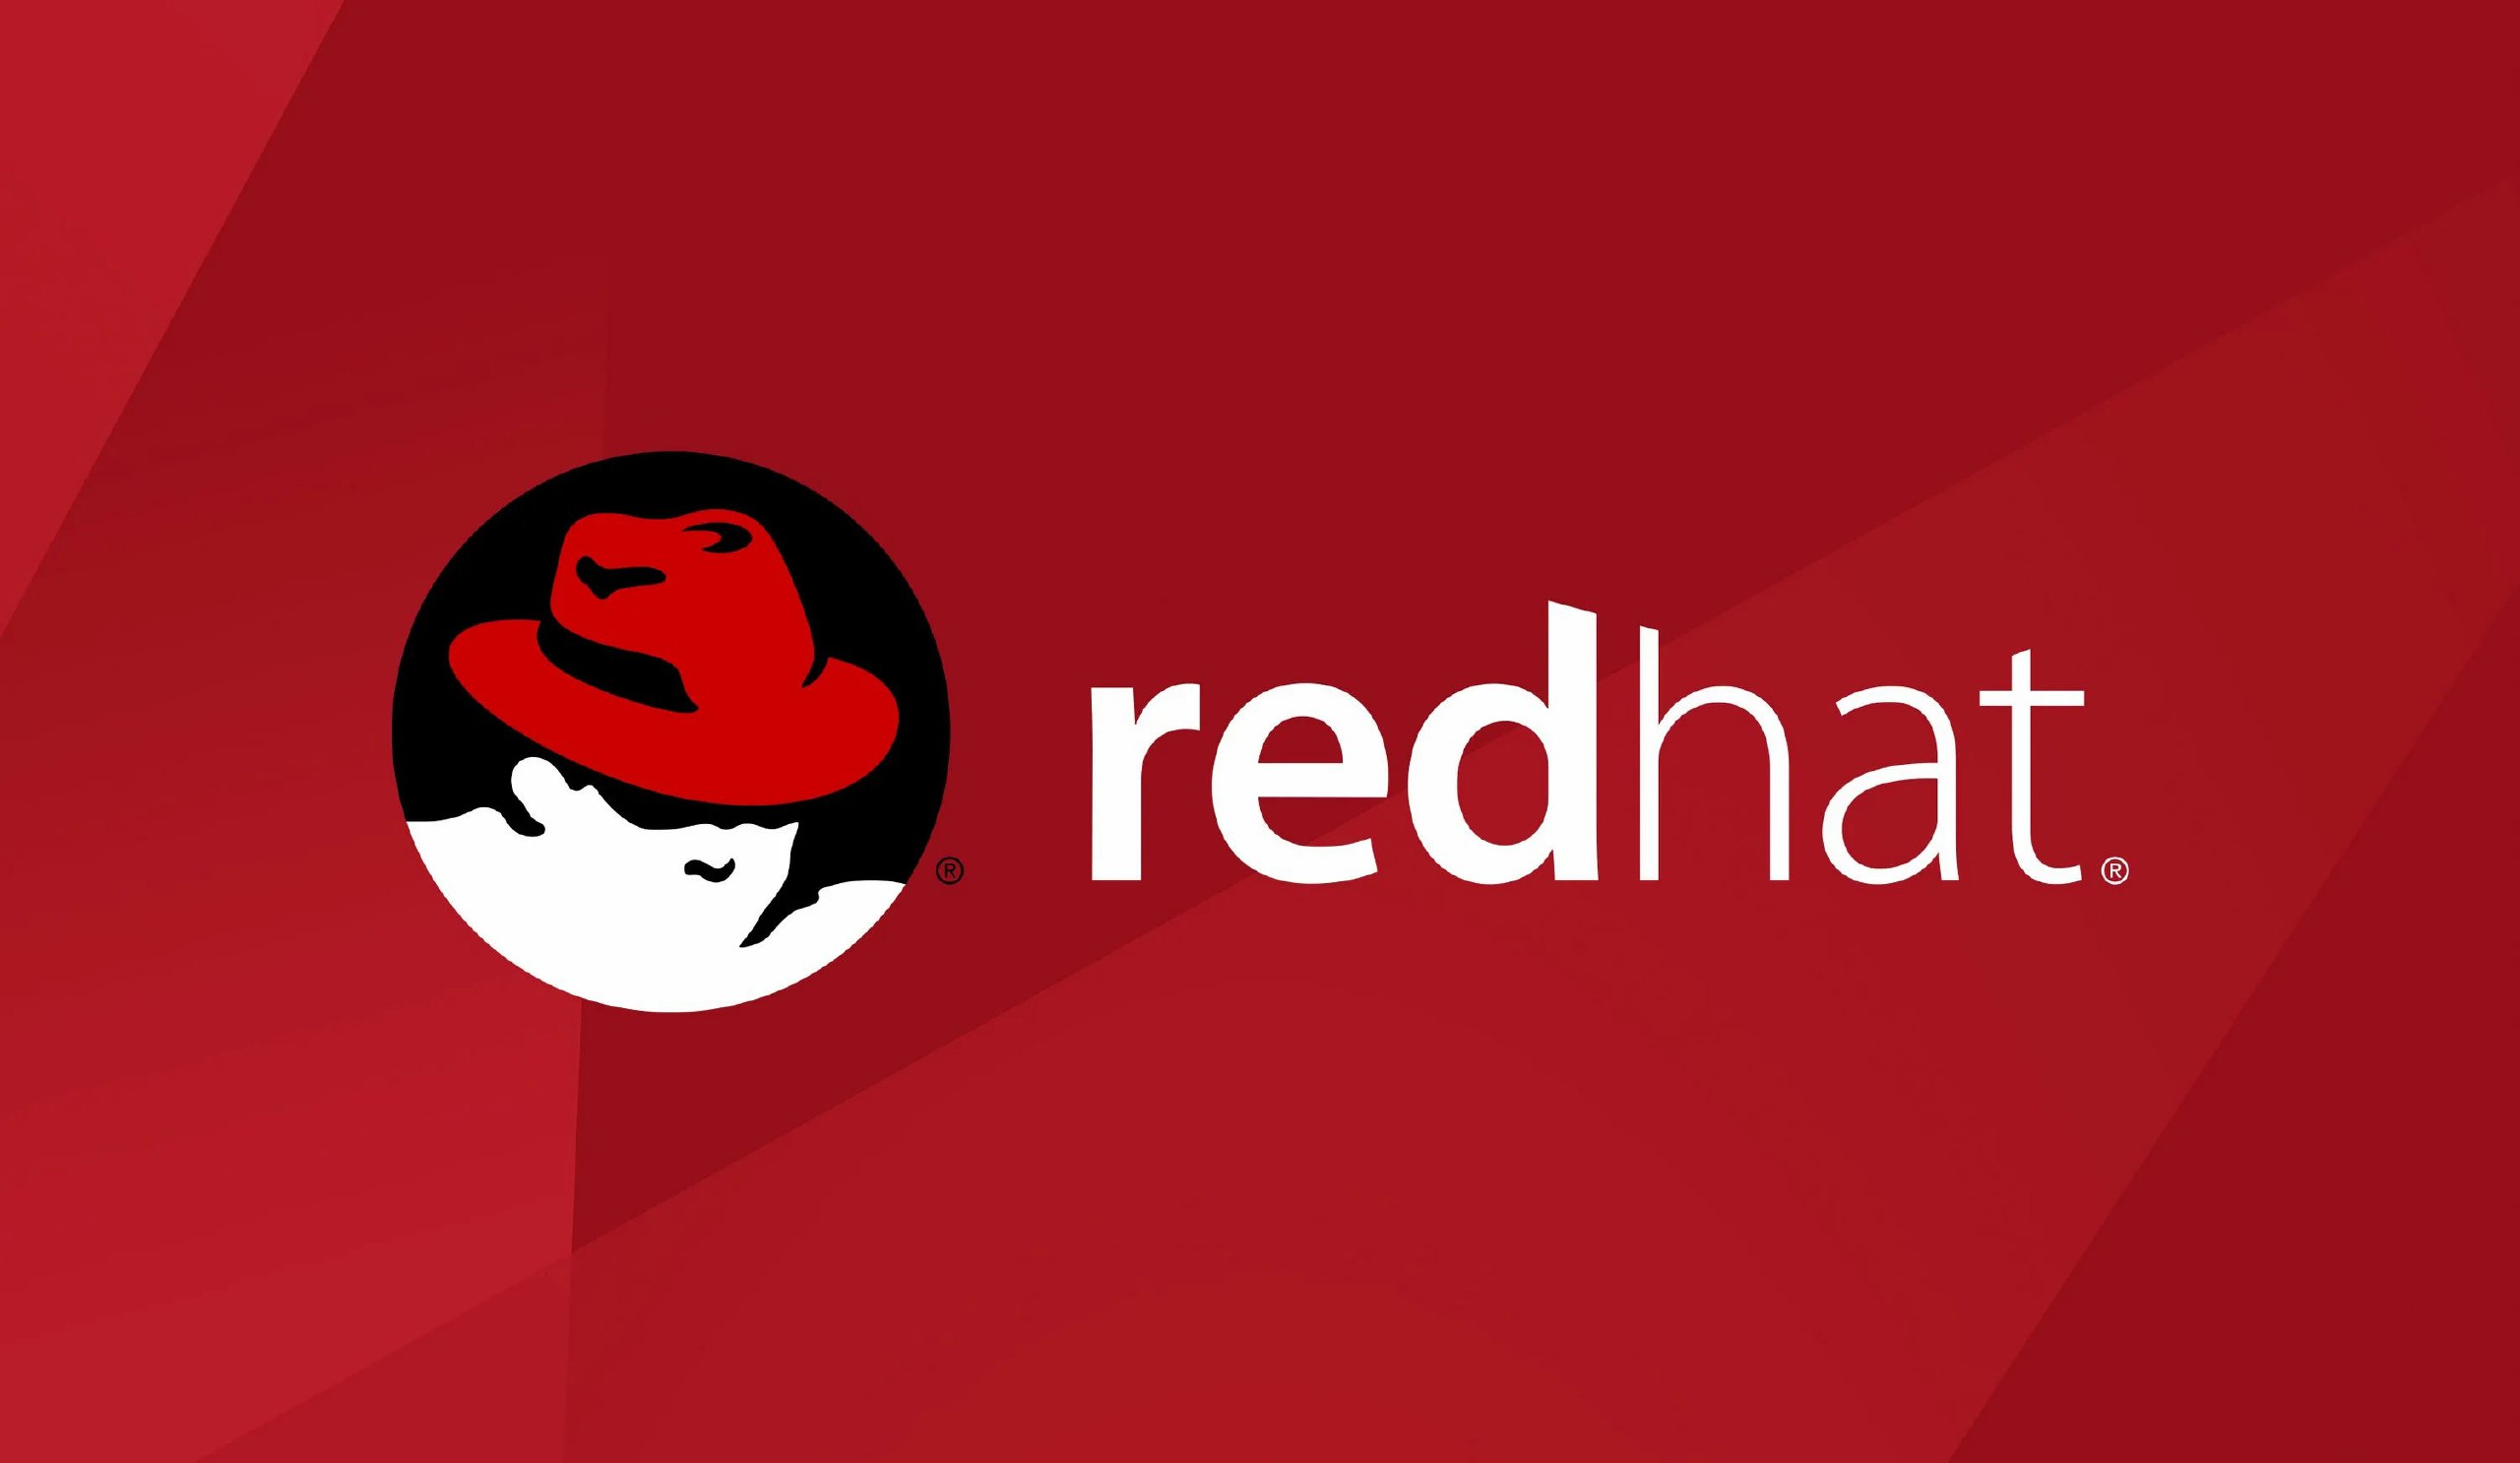 Red hat 8. Ред хат линукс. Red hat Enterprise Linux. Red hat логотип. Red hat Enterprise Linux 7.